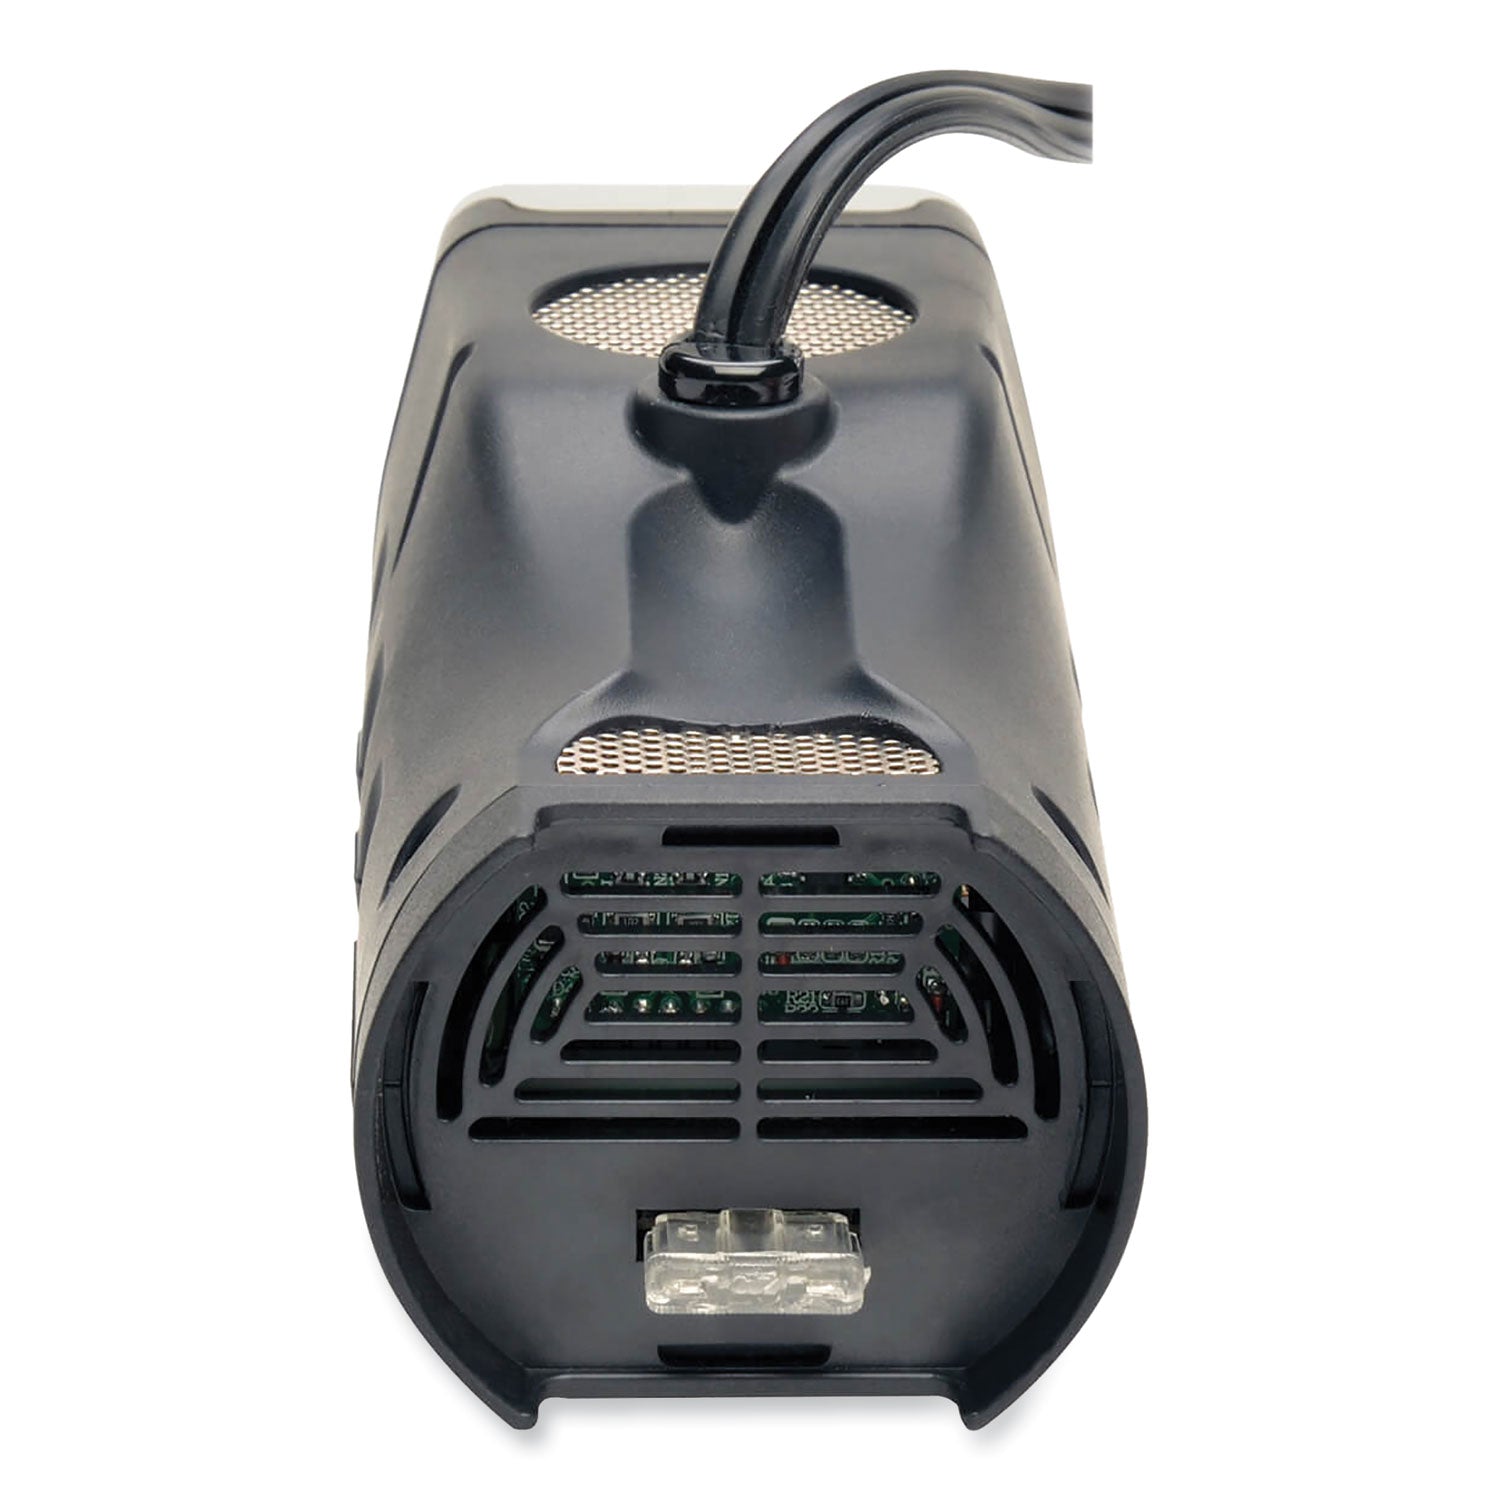 powerverter-ultra-compact-car-inverter-200-w-two-ac-outlets-two-usb-ports_trppv200cusb - 7